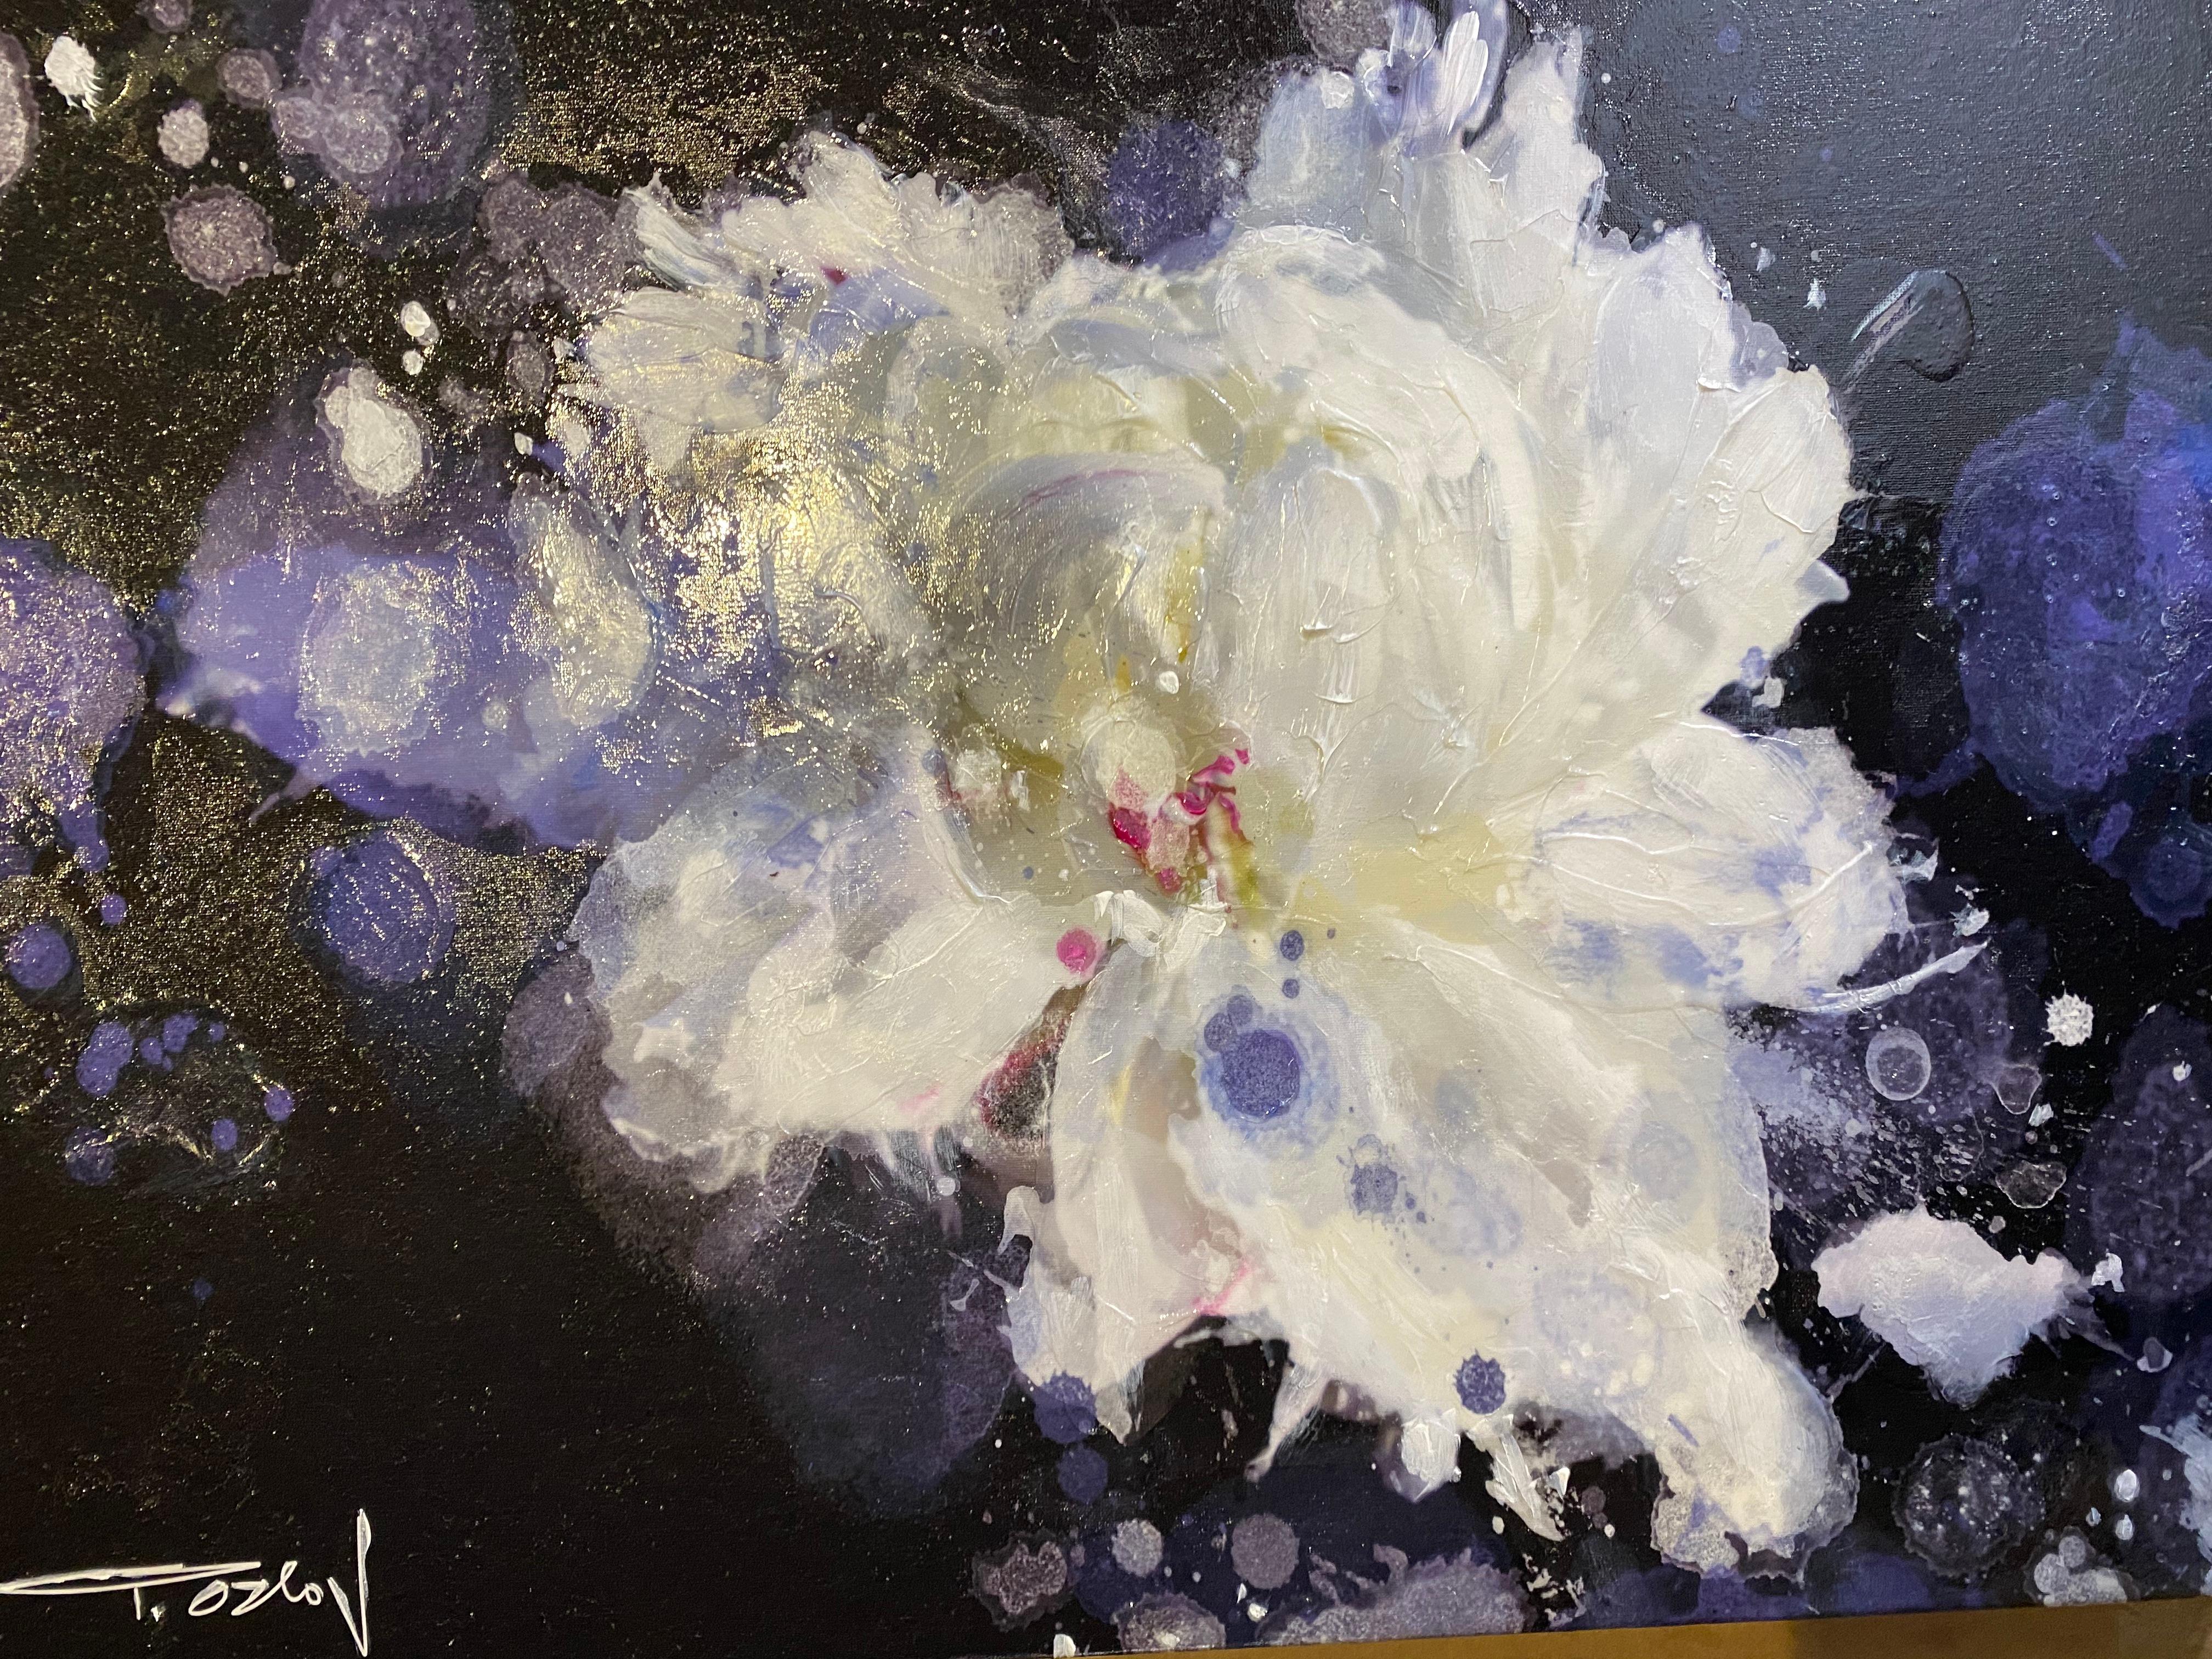 Breathless, Blue Black White Floral Painting Hand Embellished Giclee on Canvas 

State-of-the-art HAND EMBELLISHED ∽ MUSEUM QUALITY ∽ DISPLAY READY Giclee Reproduction
Each limited edition Giclee is hand embellished by the artist, making it one of a